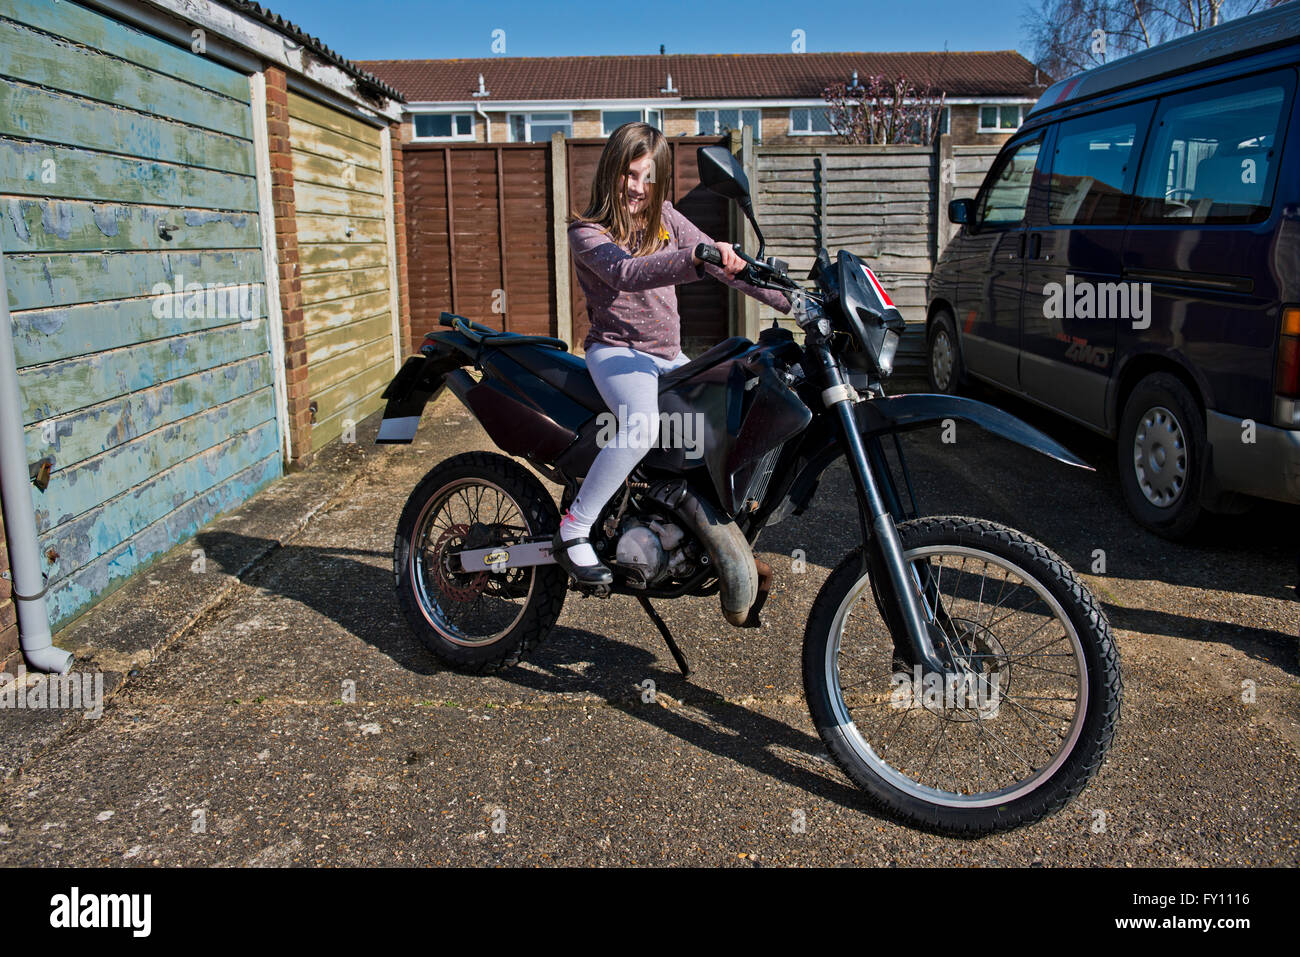 Model released image of a young girl pretending to ride a motorbike. Stock Photo